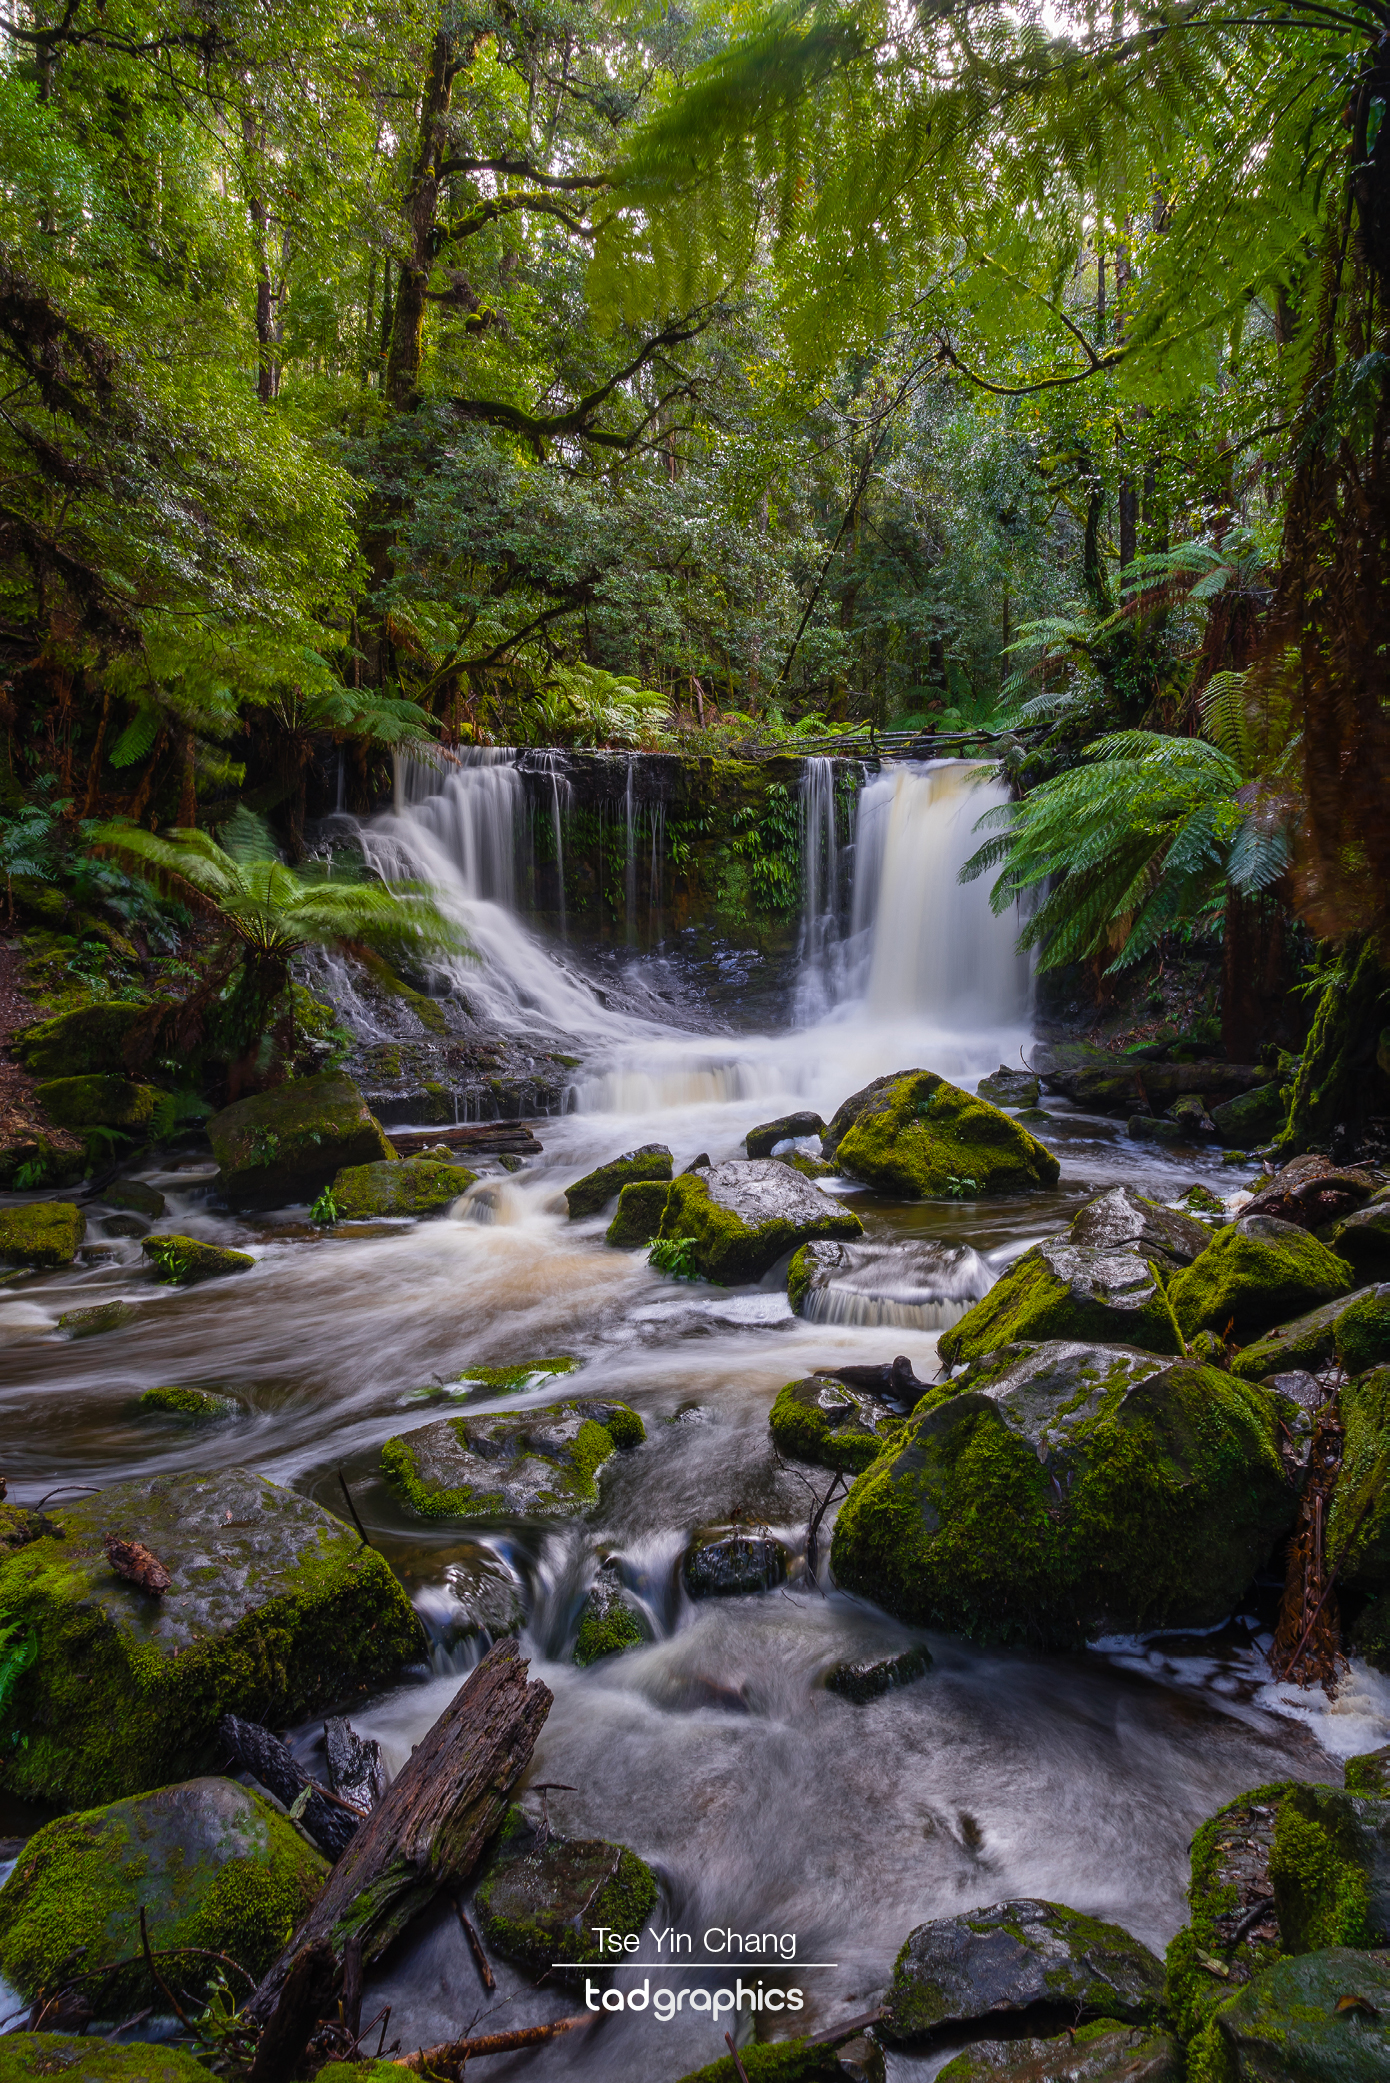 This photo of Horseshoe Falls in Mount Field National Park was showcased at the Your Exhibition Shot exhibition at the Berlin Blue Art Gallery, Germany in November 2018